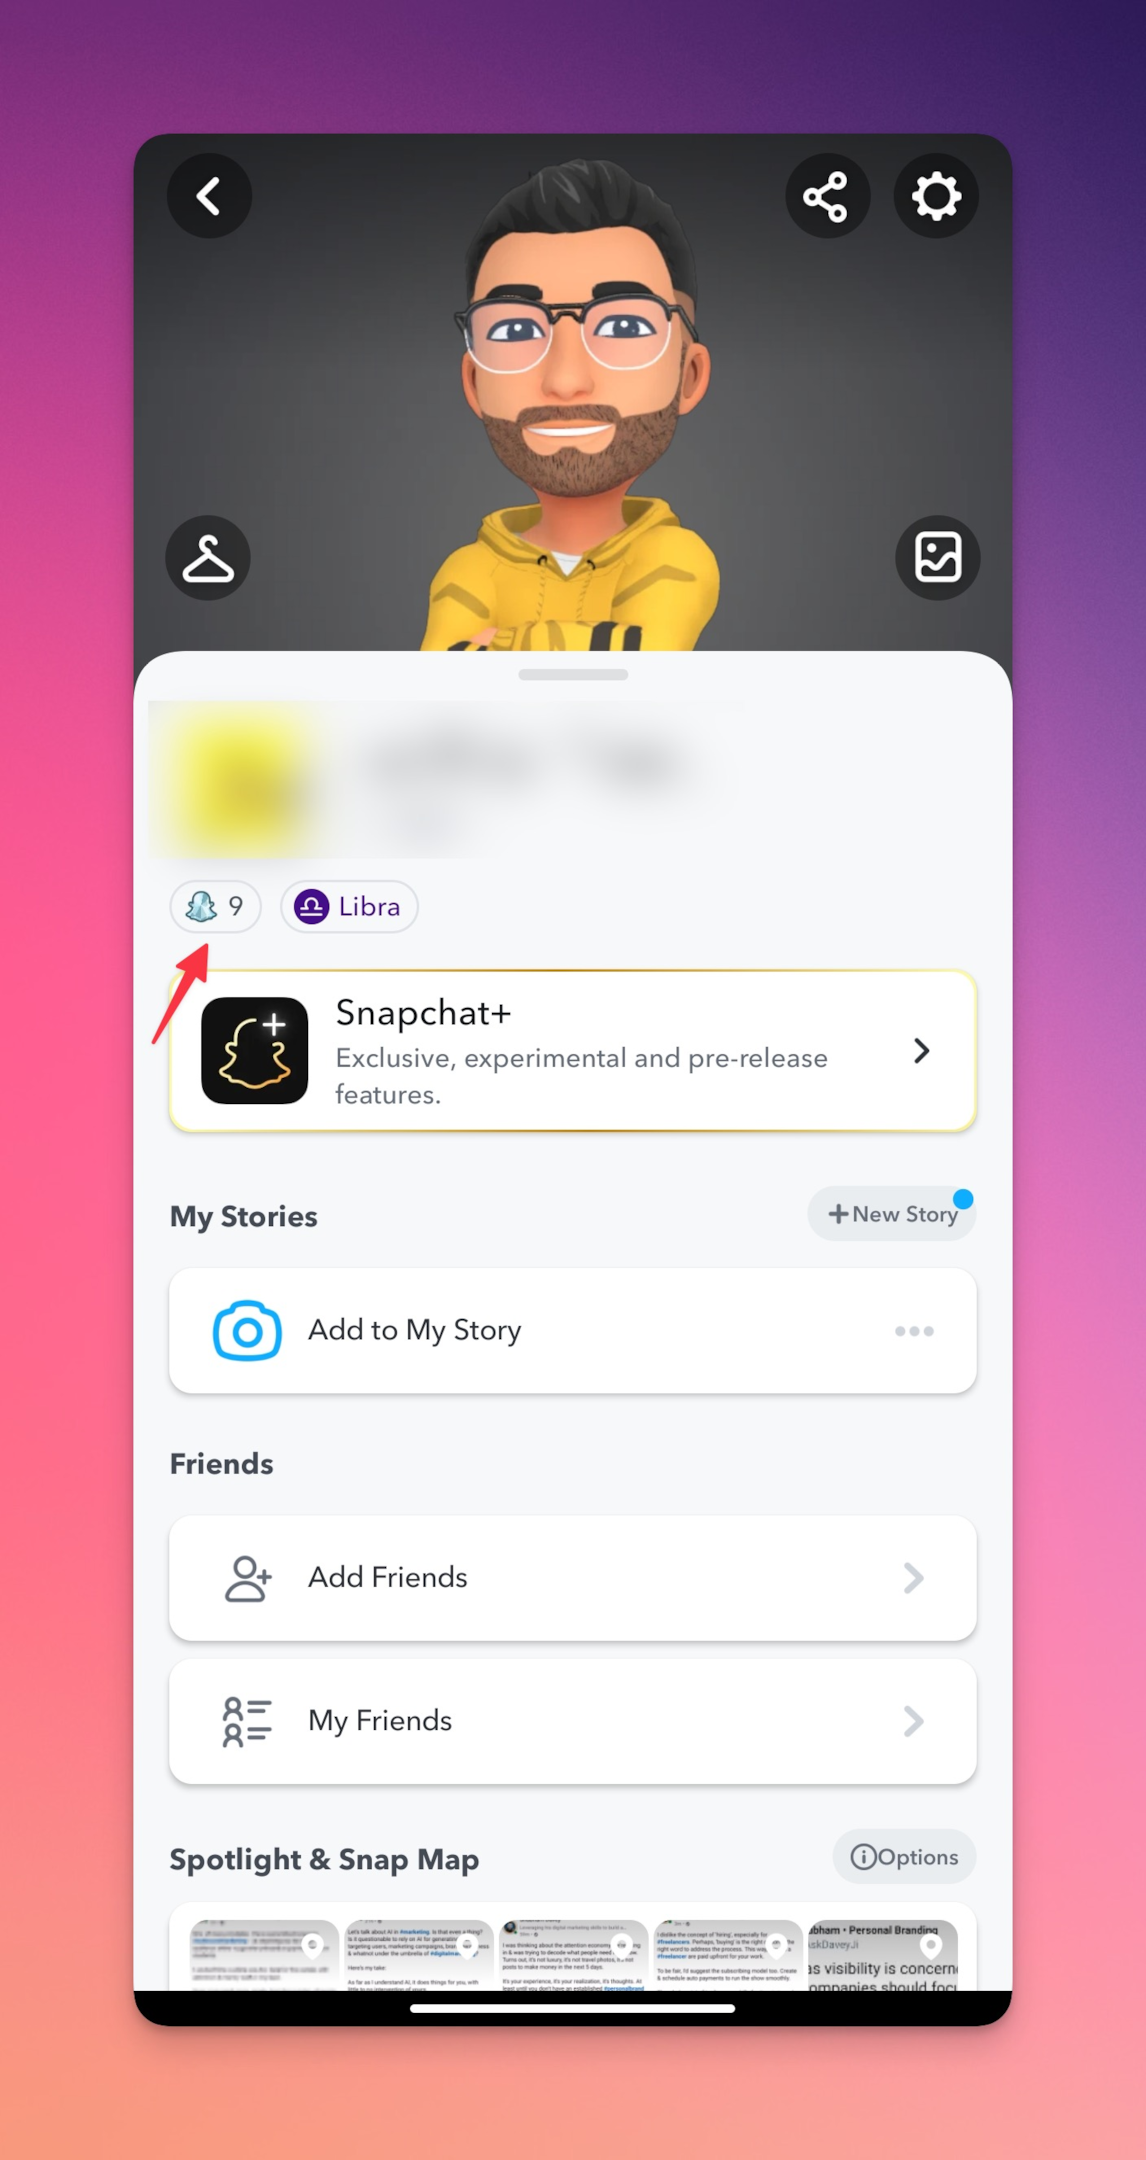 Remote.tools pointing out the Snapchat score your Snapchat profile